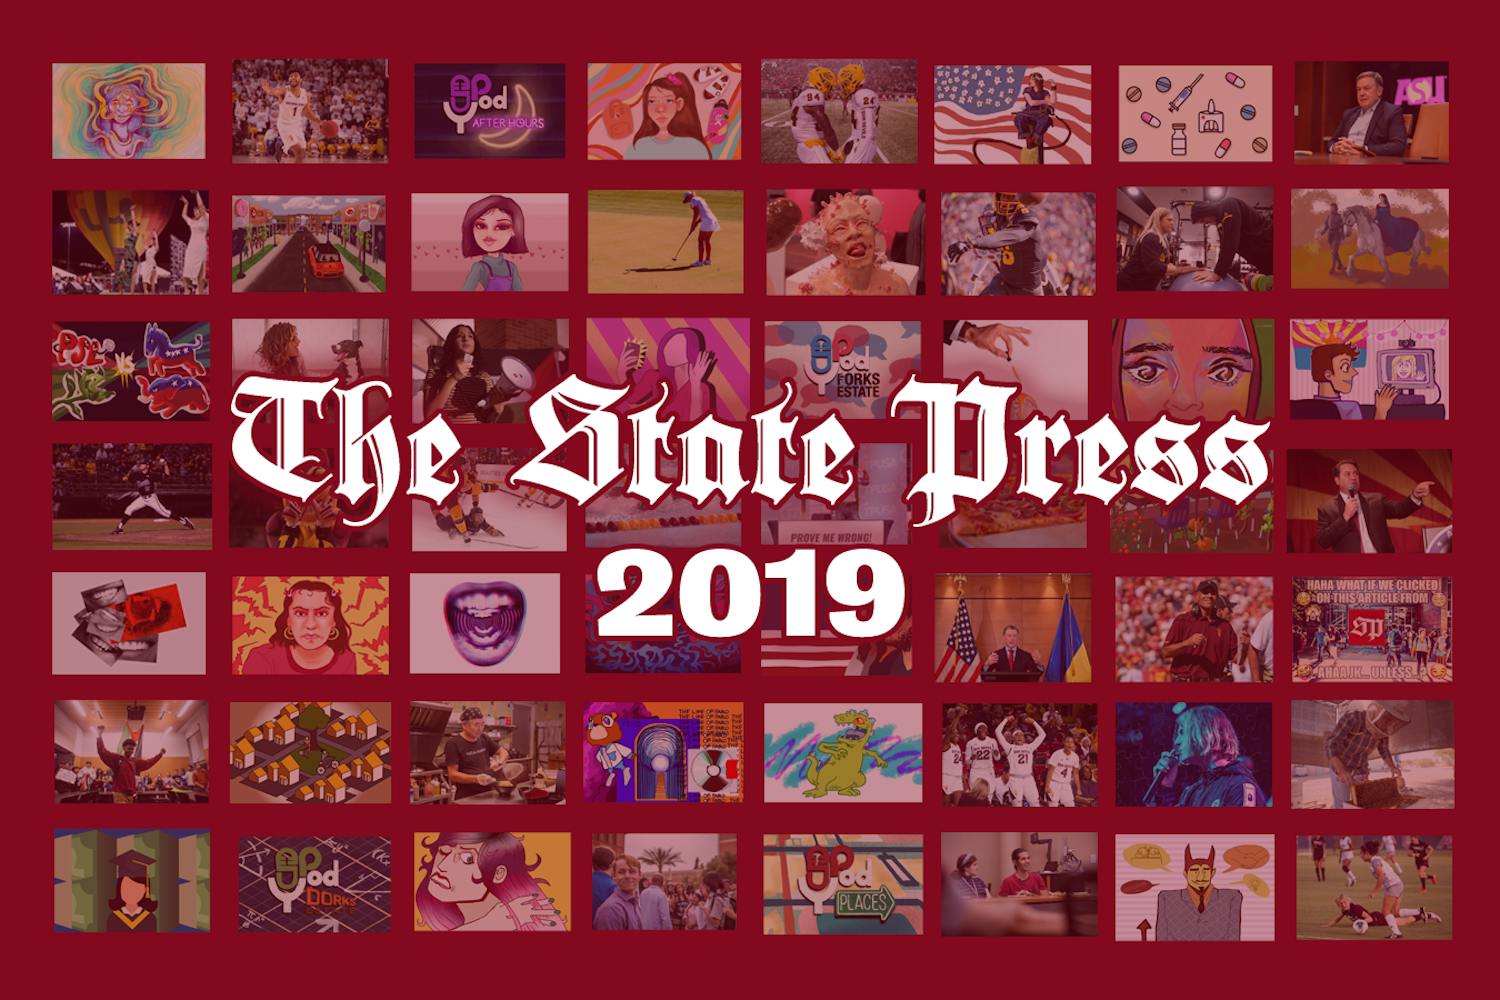 The State Press Best of 2019